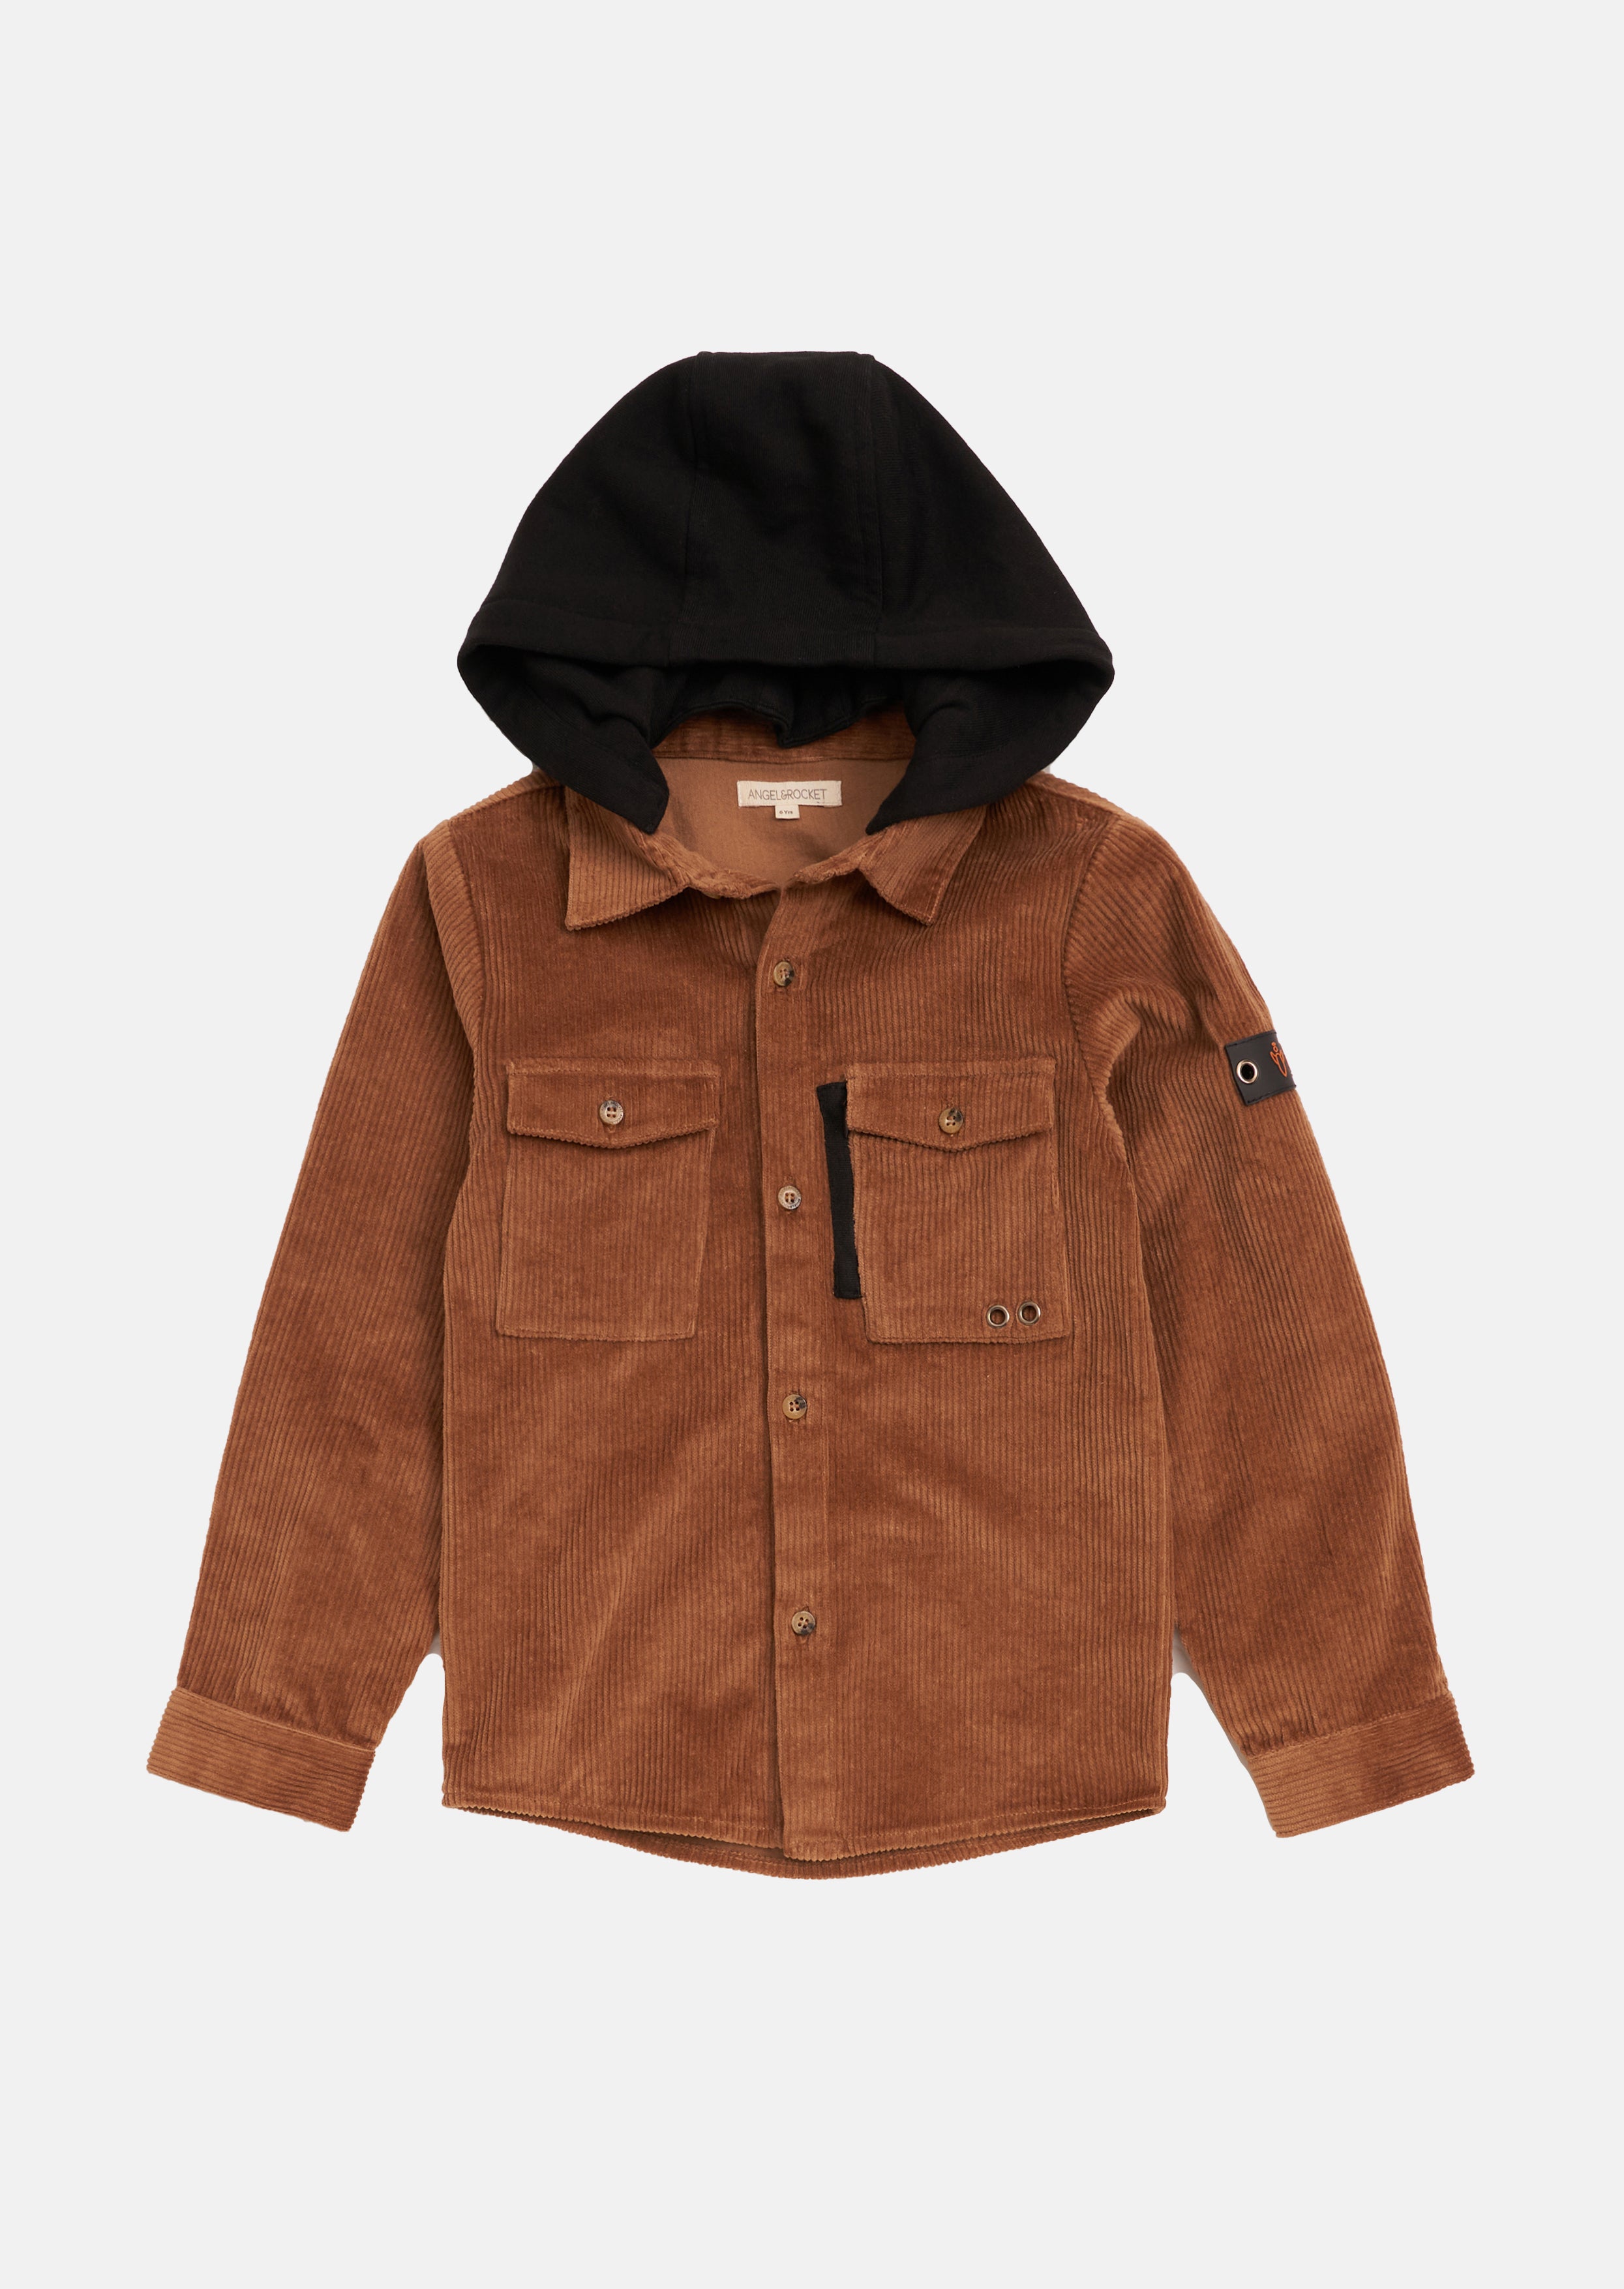 Boys Brown Full Sleeves Shirt with Hooded